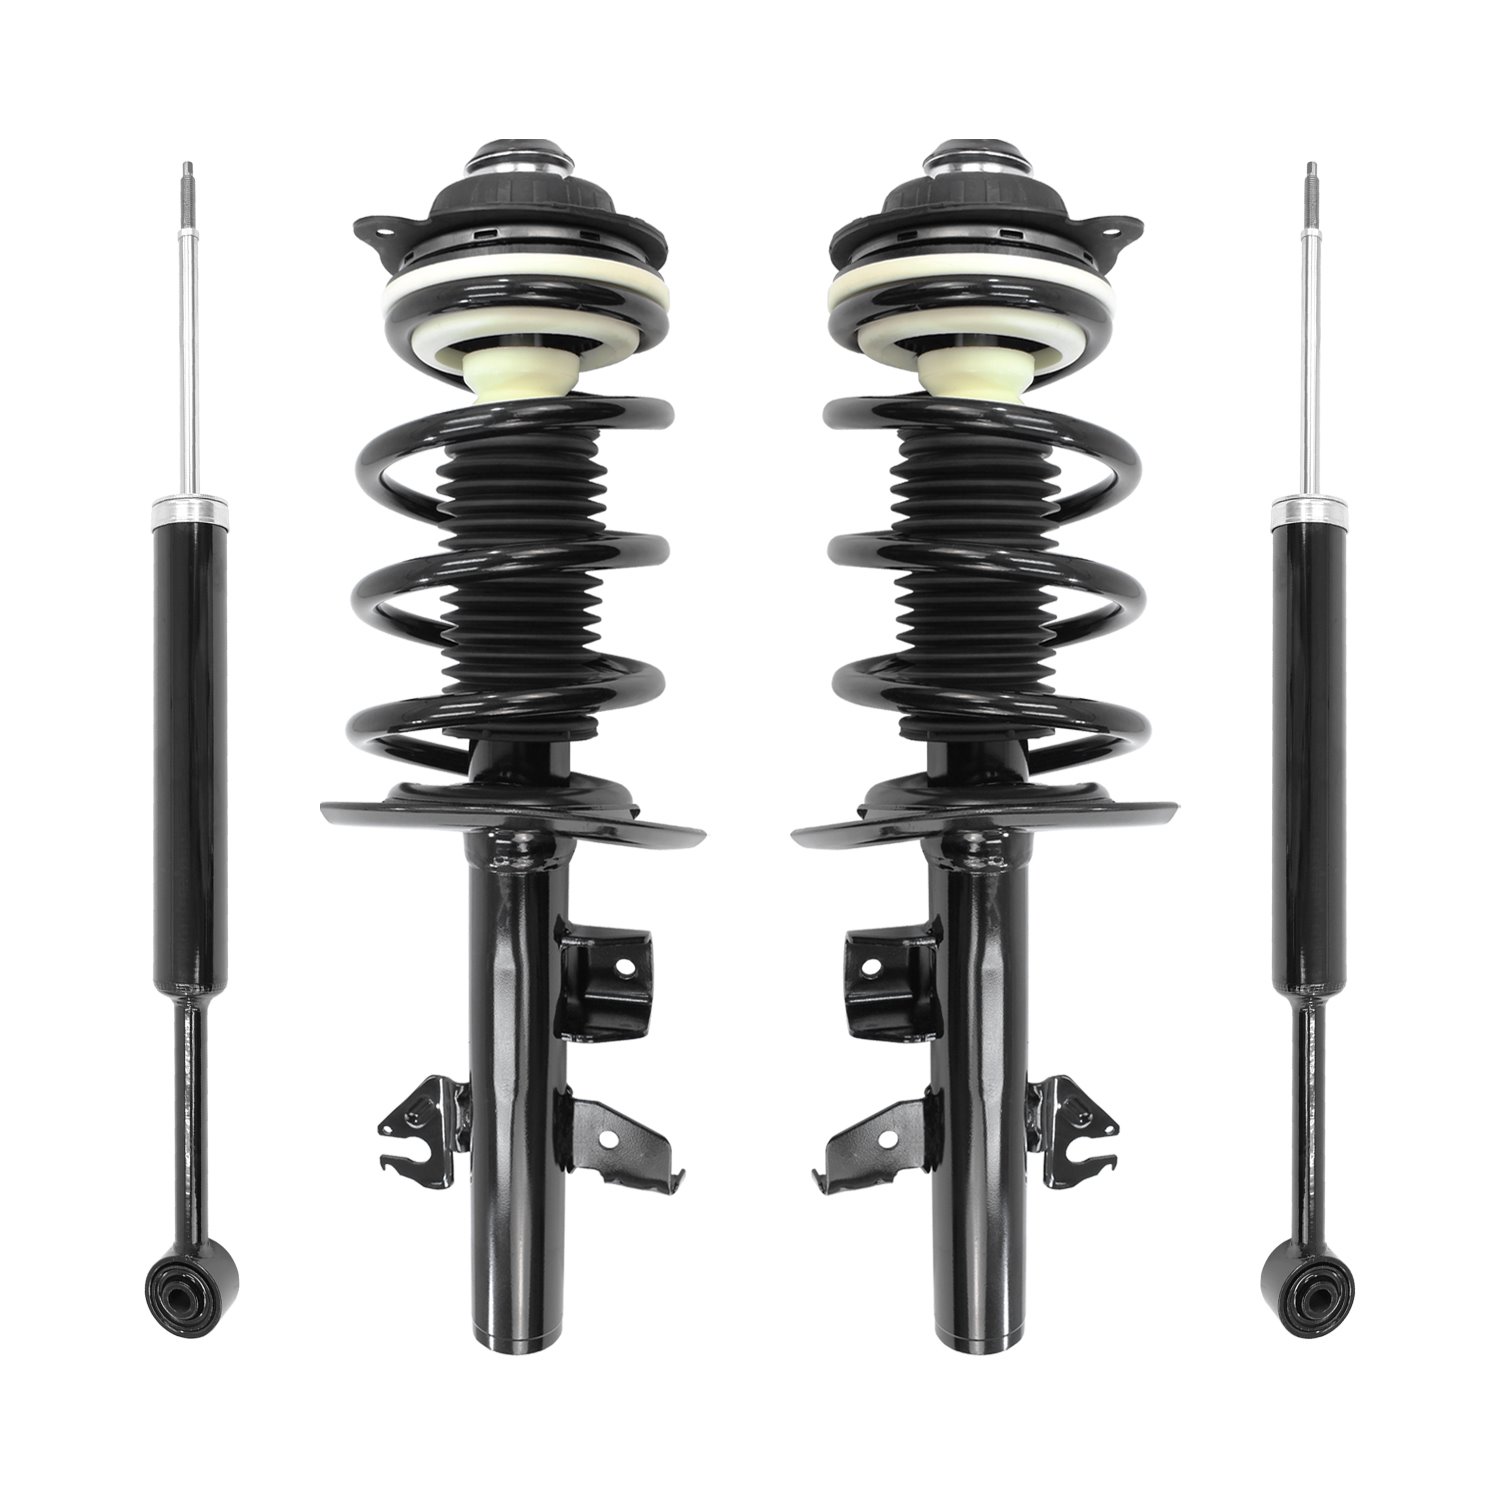 4-13613-253390-001 Front & Rear Complete Strut Assembly Shock Absorber Kit Fits Select Jeep Cherokee